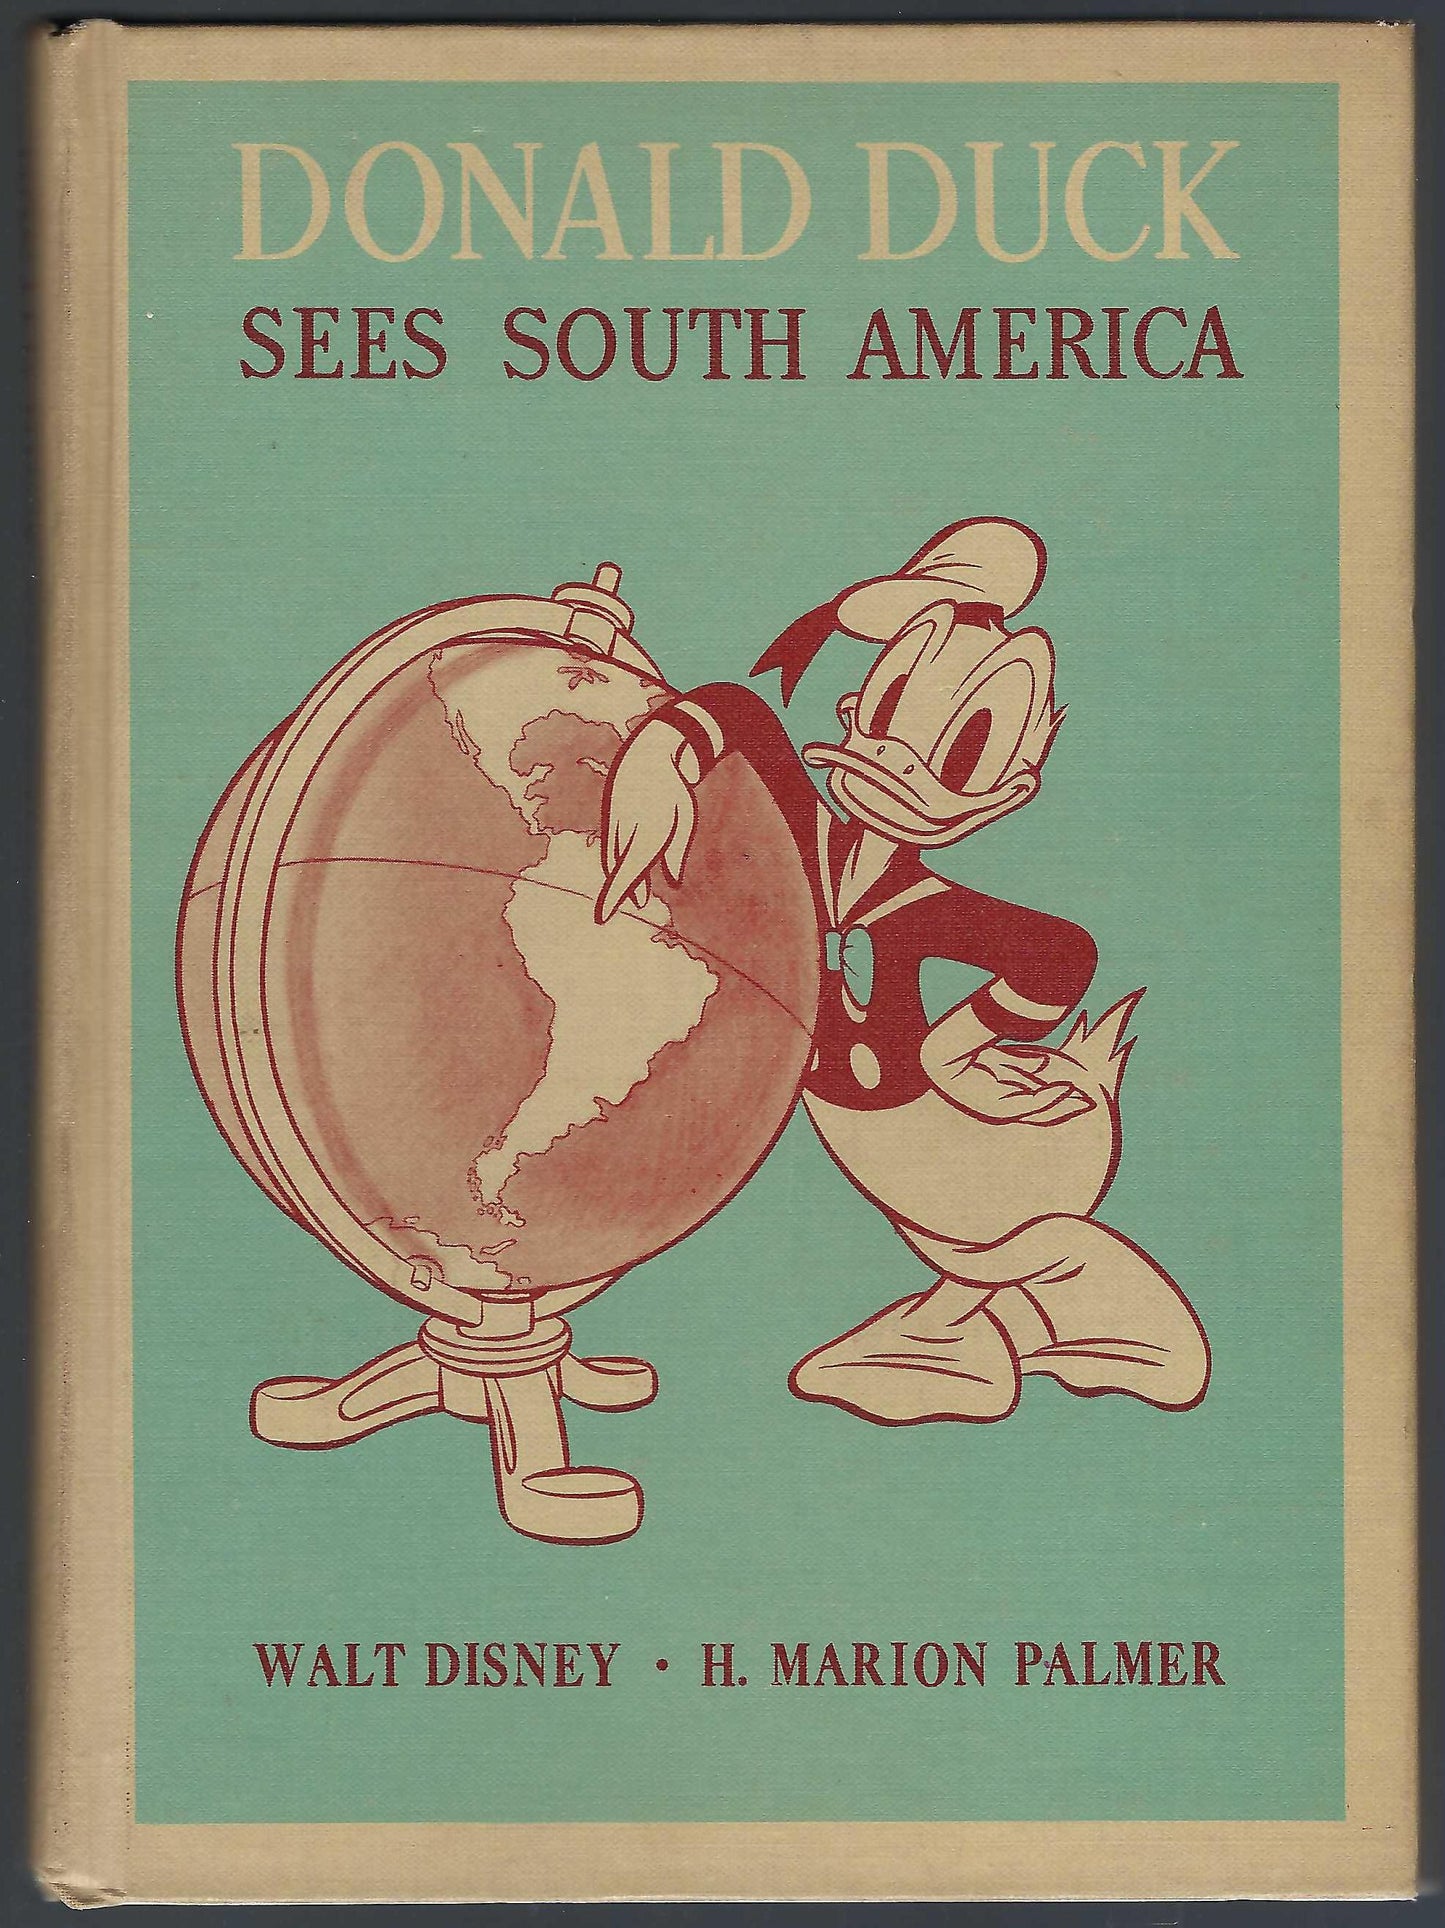 Donald Duck Sees South America front cover